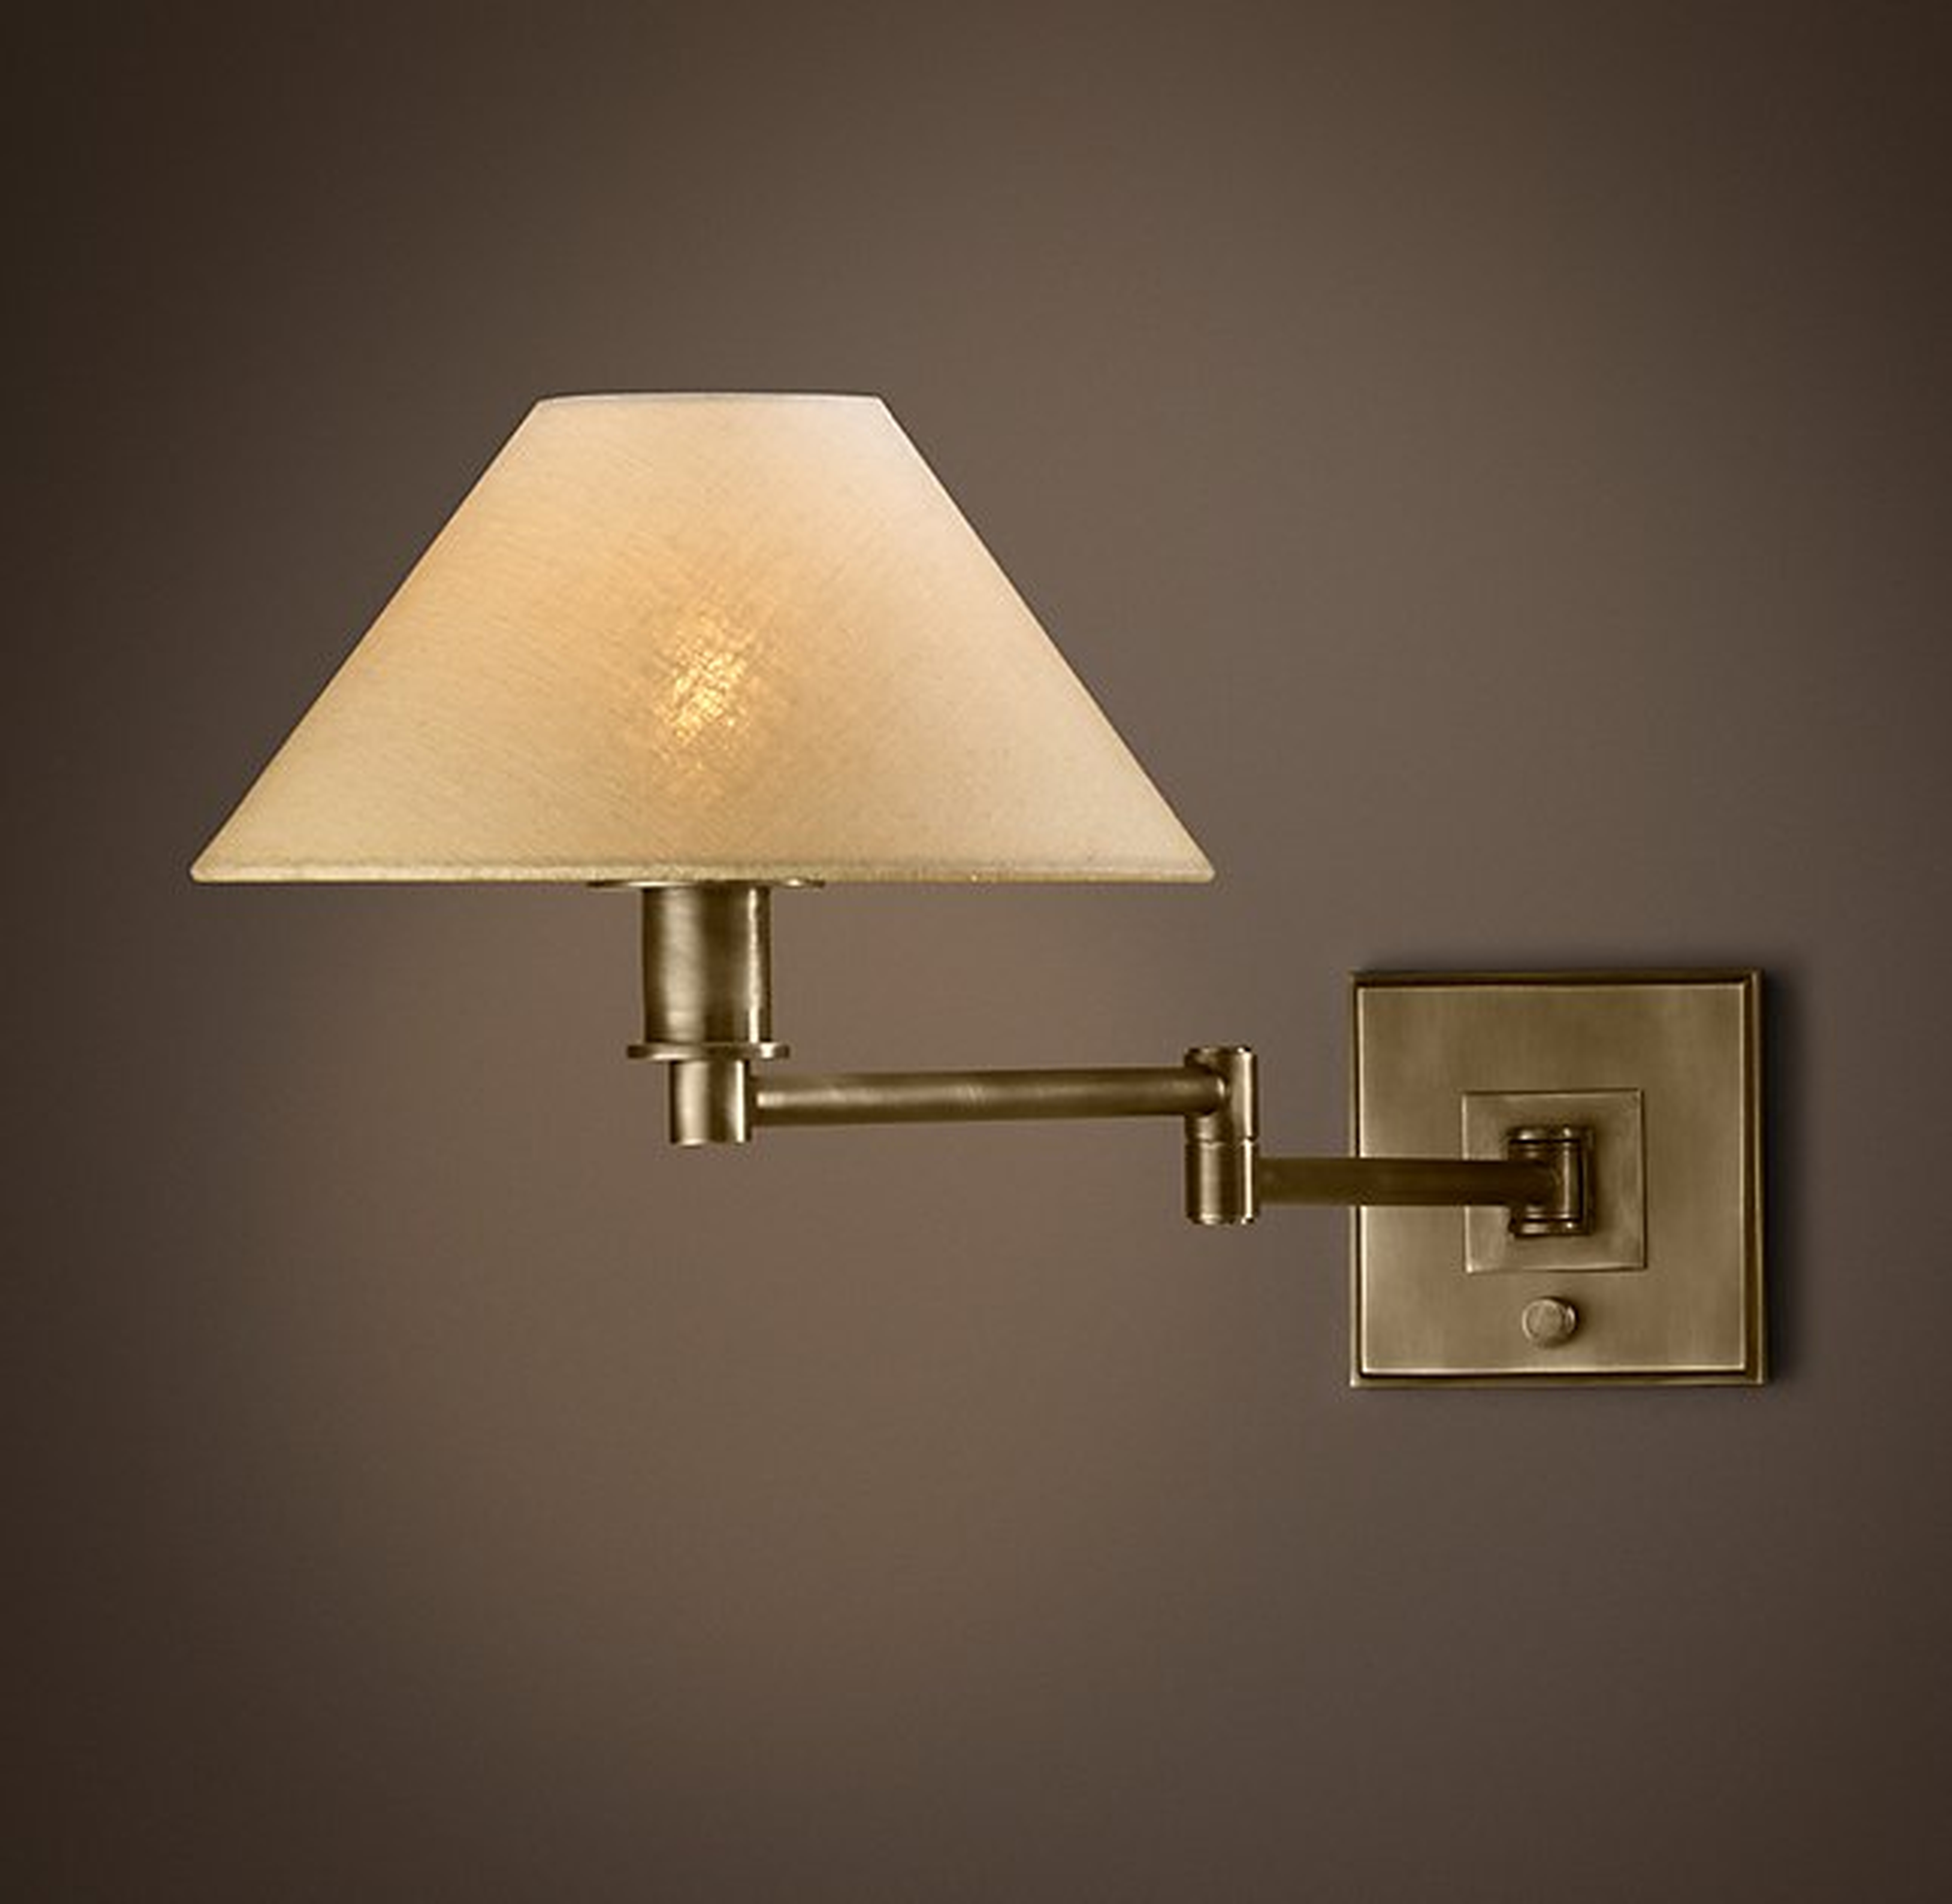 PETITE CANDLESTICK SWING-ARM SCONCE WITH LINEN SHADE - RH